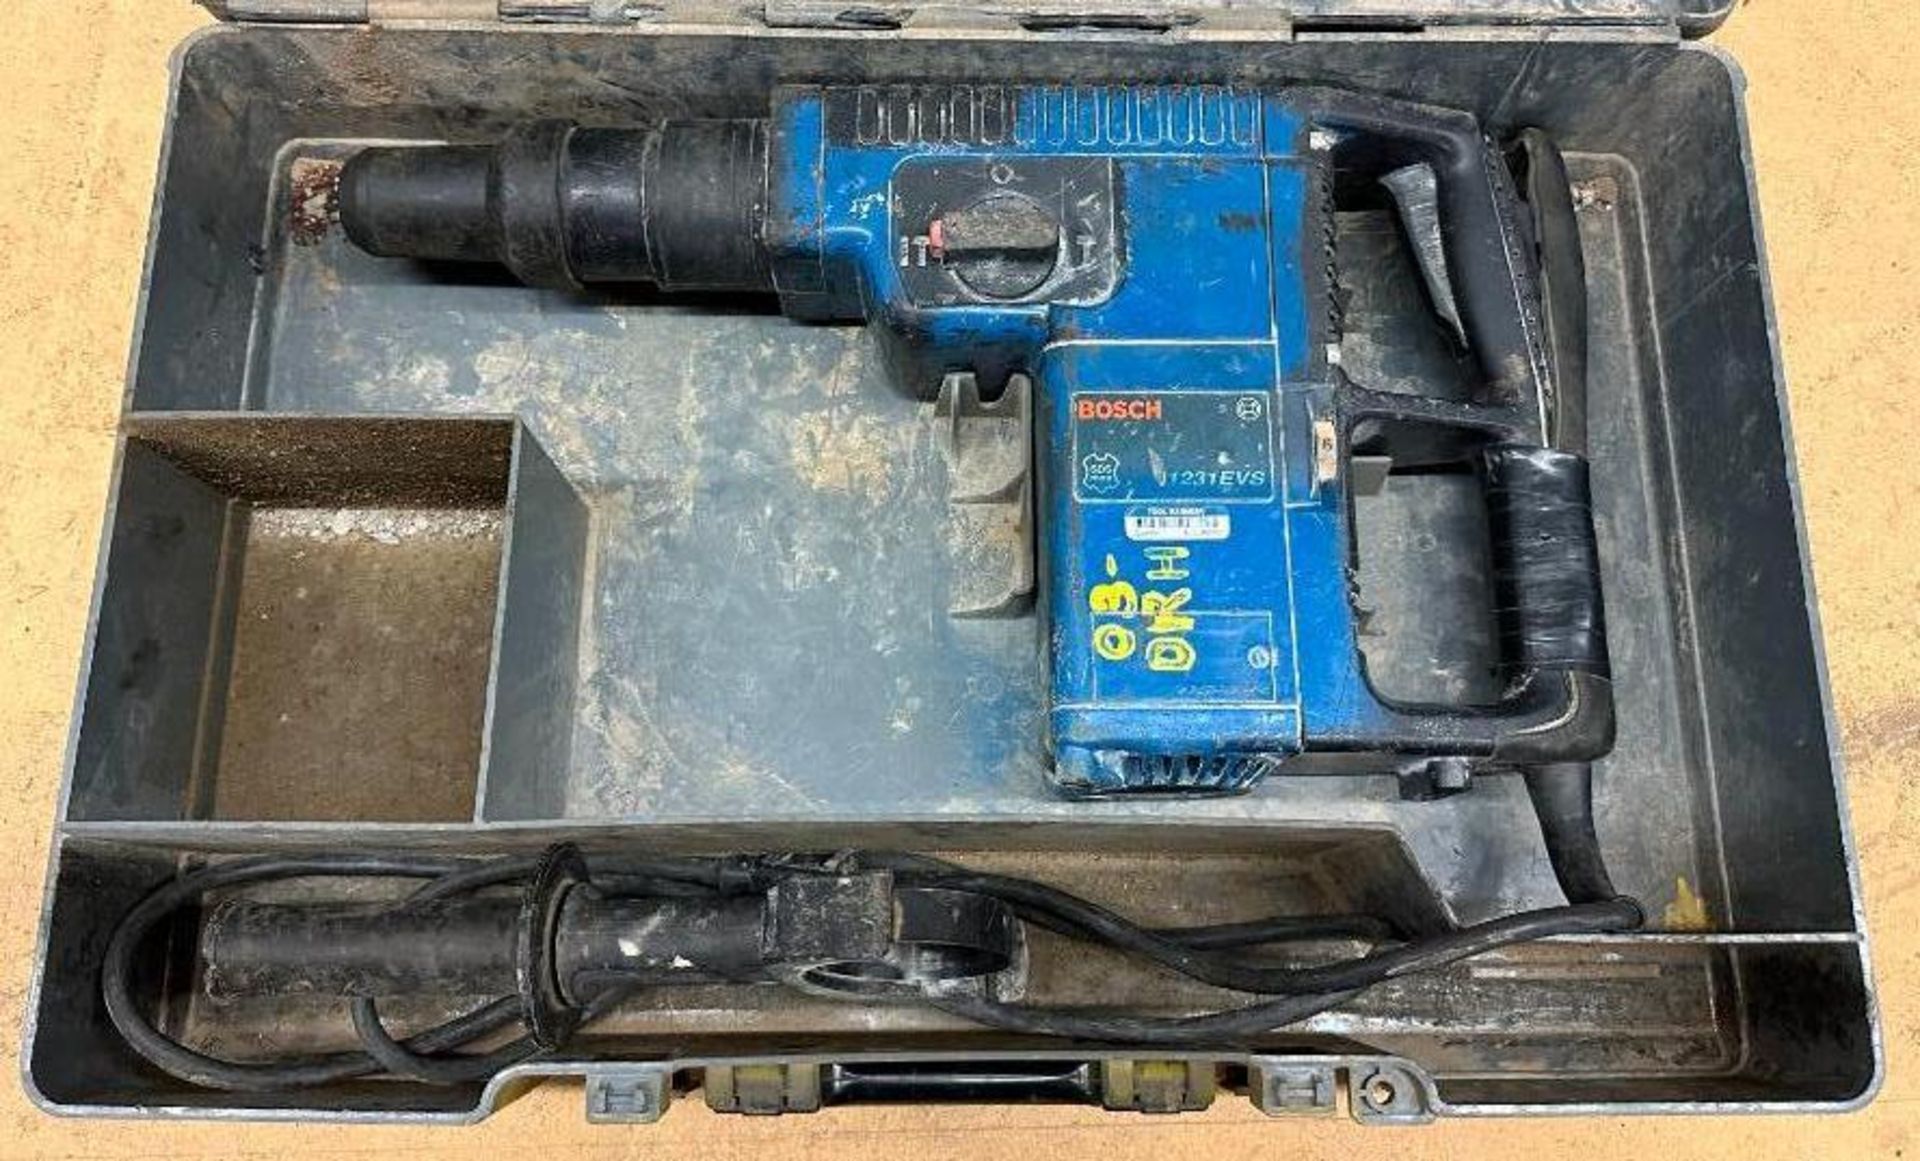 ELECTRIC ROTARY HAMMER WITH CASE